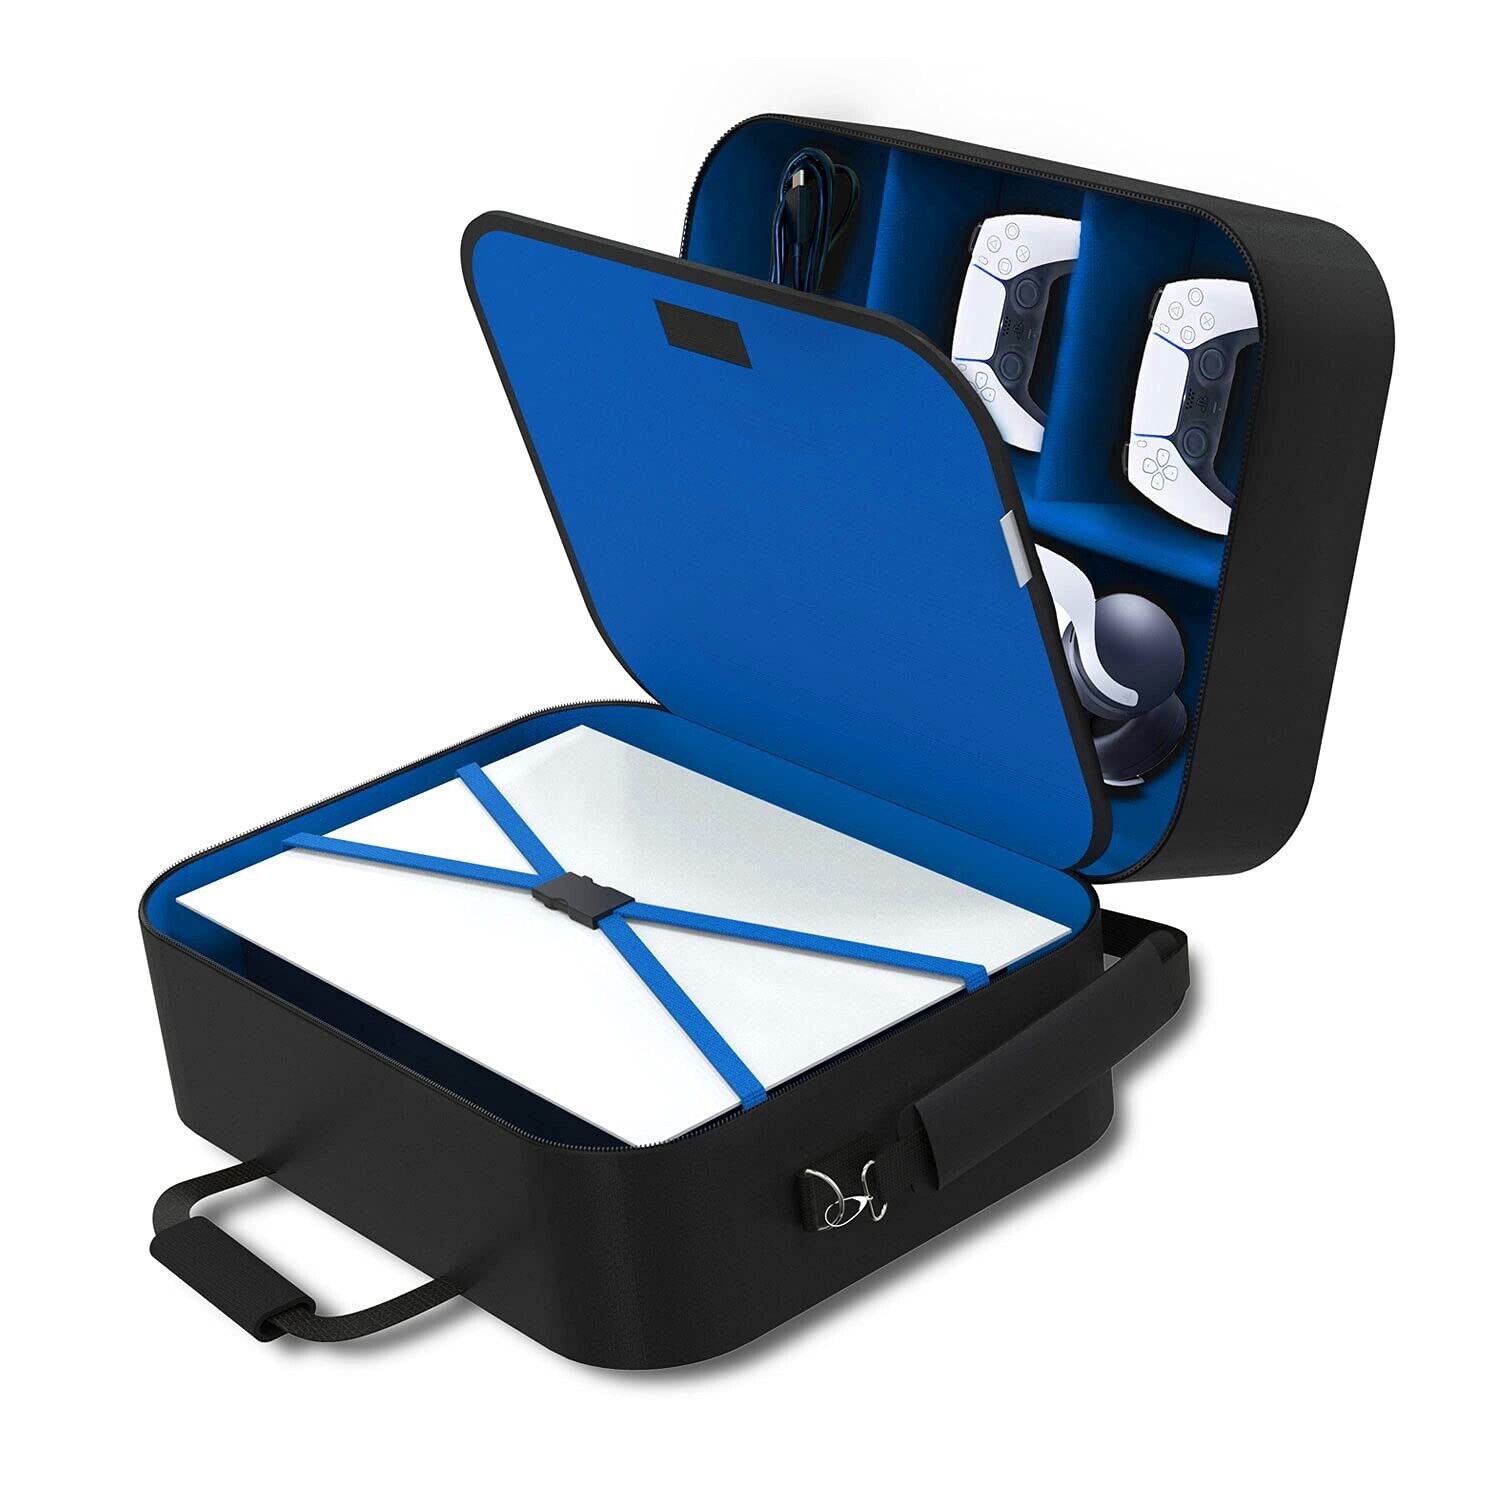 Carrying Case for PS5, PS5 Travel Case Protective Playstation 5 Storage Bag